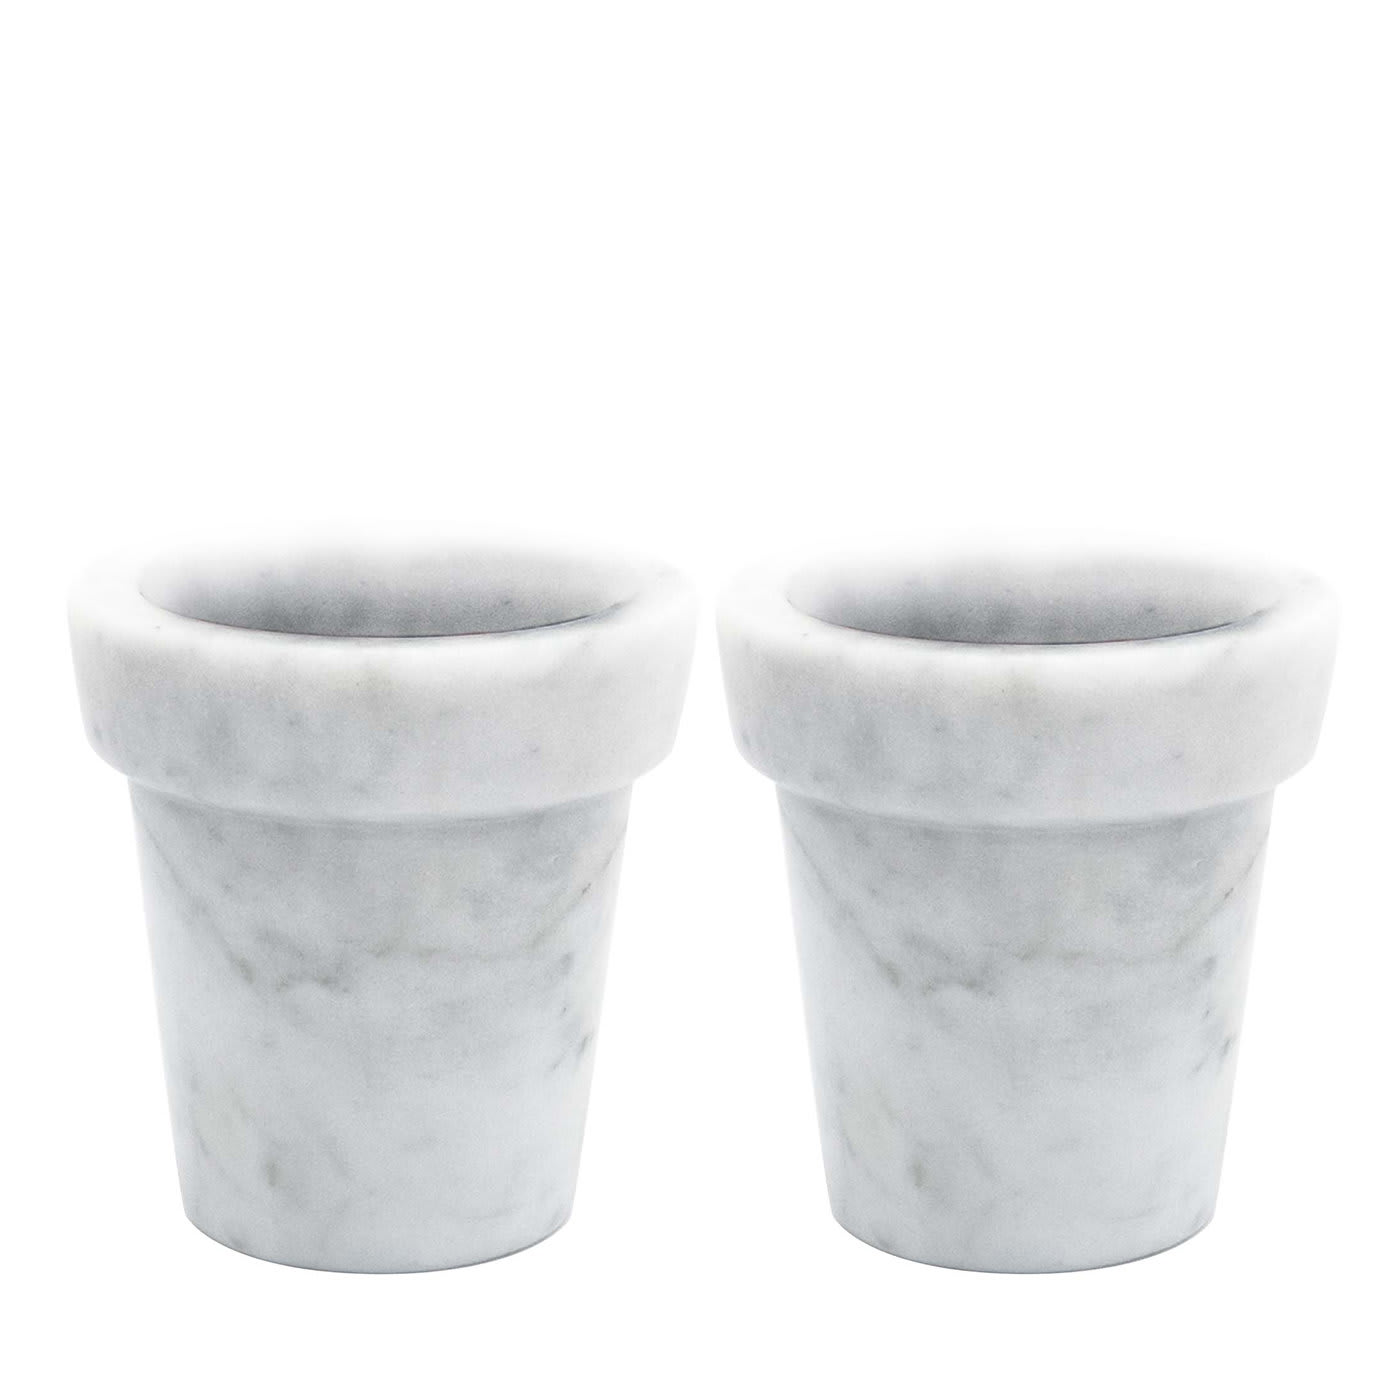 Set of 2 Small Vases in White Carrara Marble - FiammettaV Home Collection